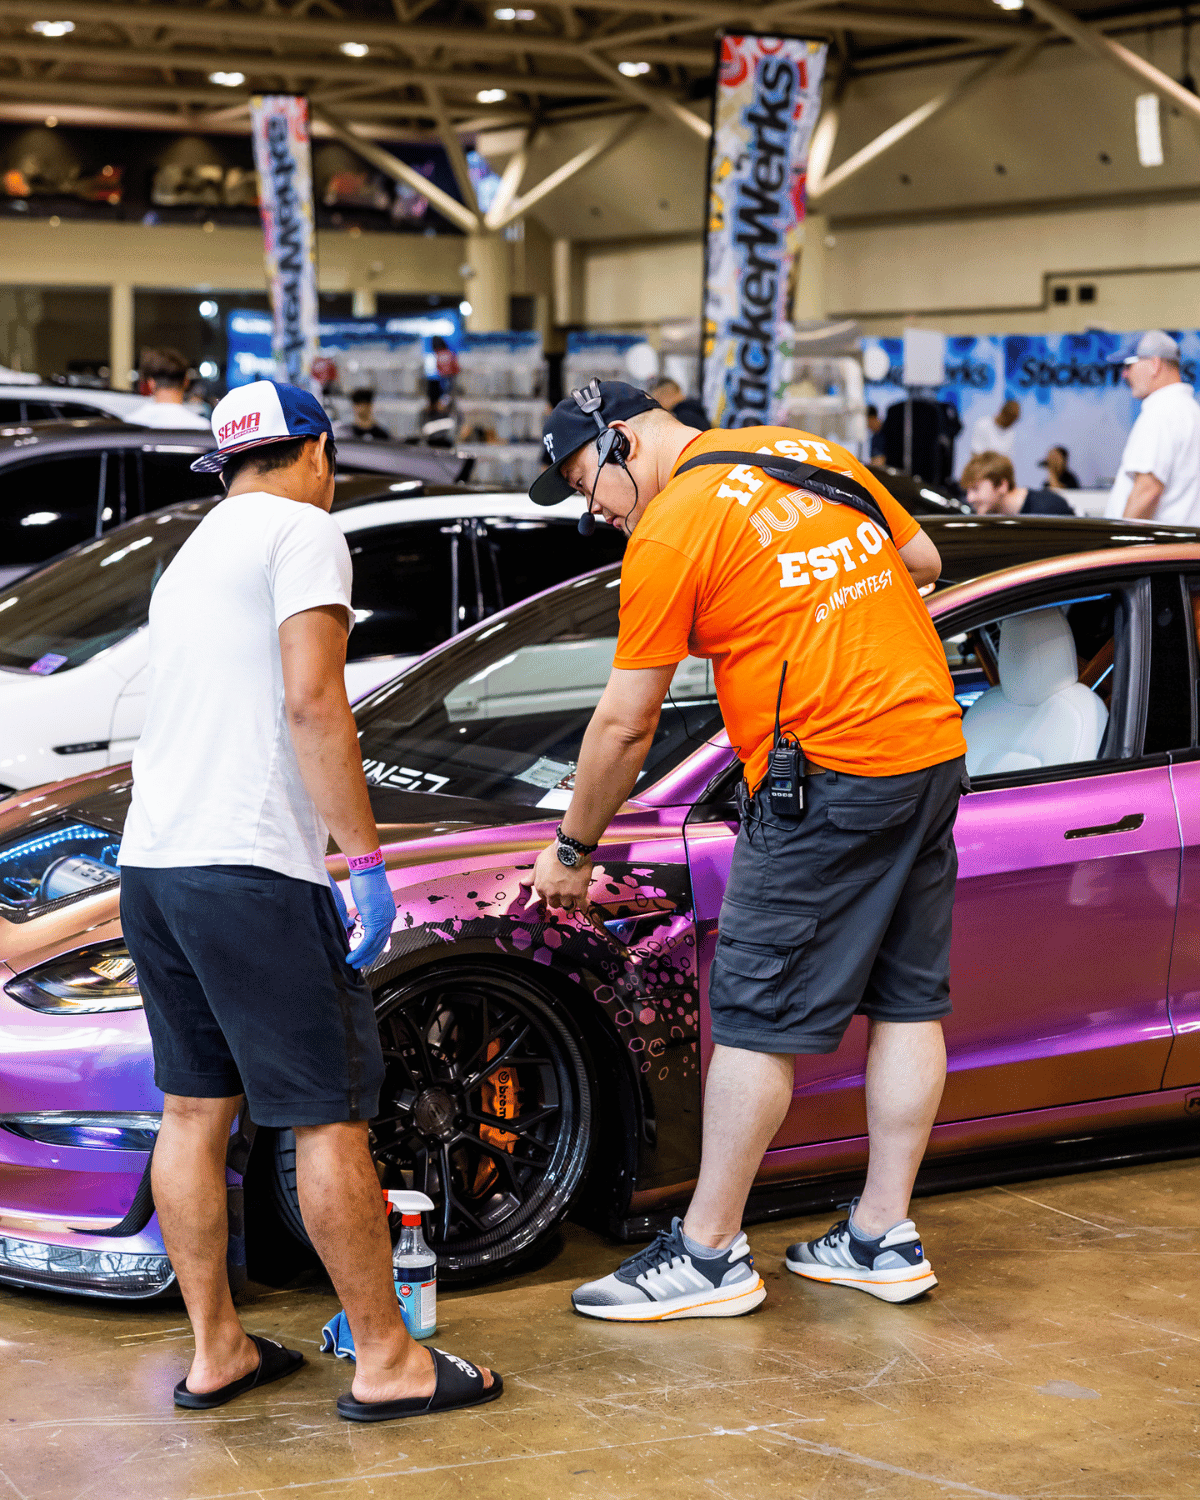 Register your Modified Car or Truck for Top Awards & Cash Prizes at ImportFest Toronto